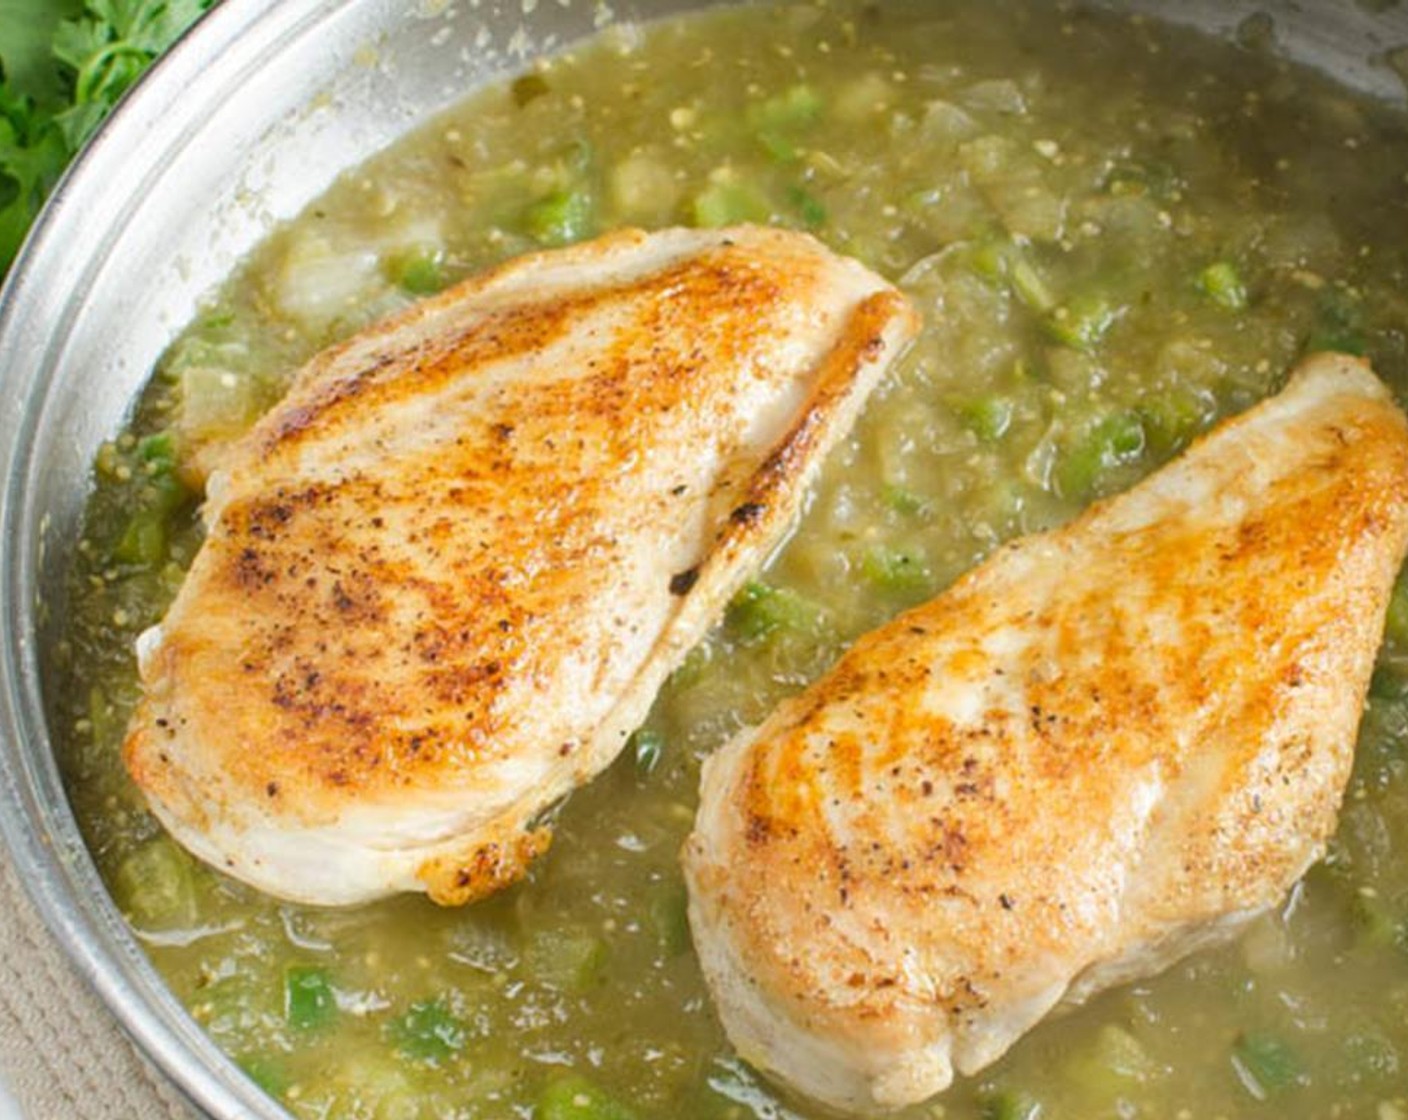 step 6 Add the organic chicken breasts back to the pan, cover tightly with lid and reduce heat to medium-low. Simmer for 10 minutes until organic chicken breasts are cooked through.